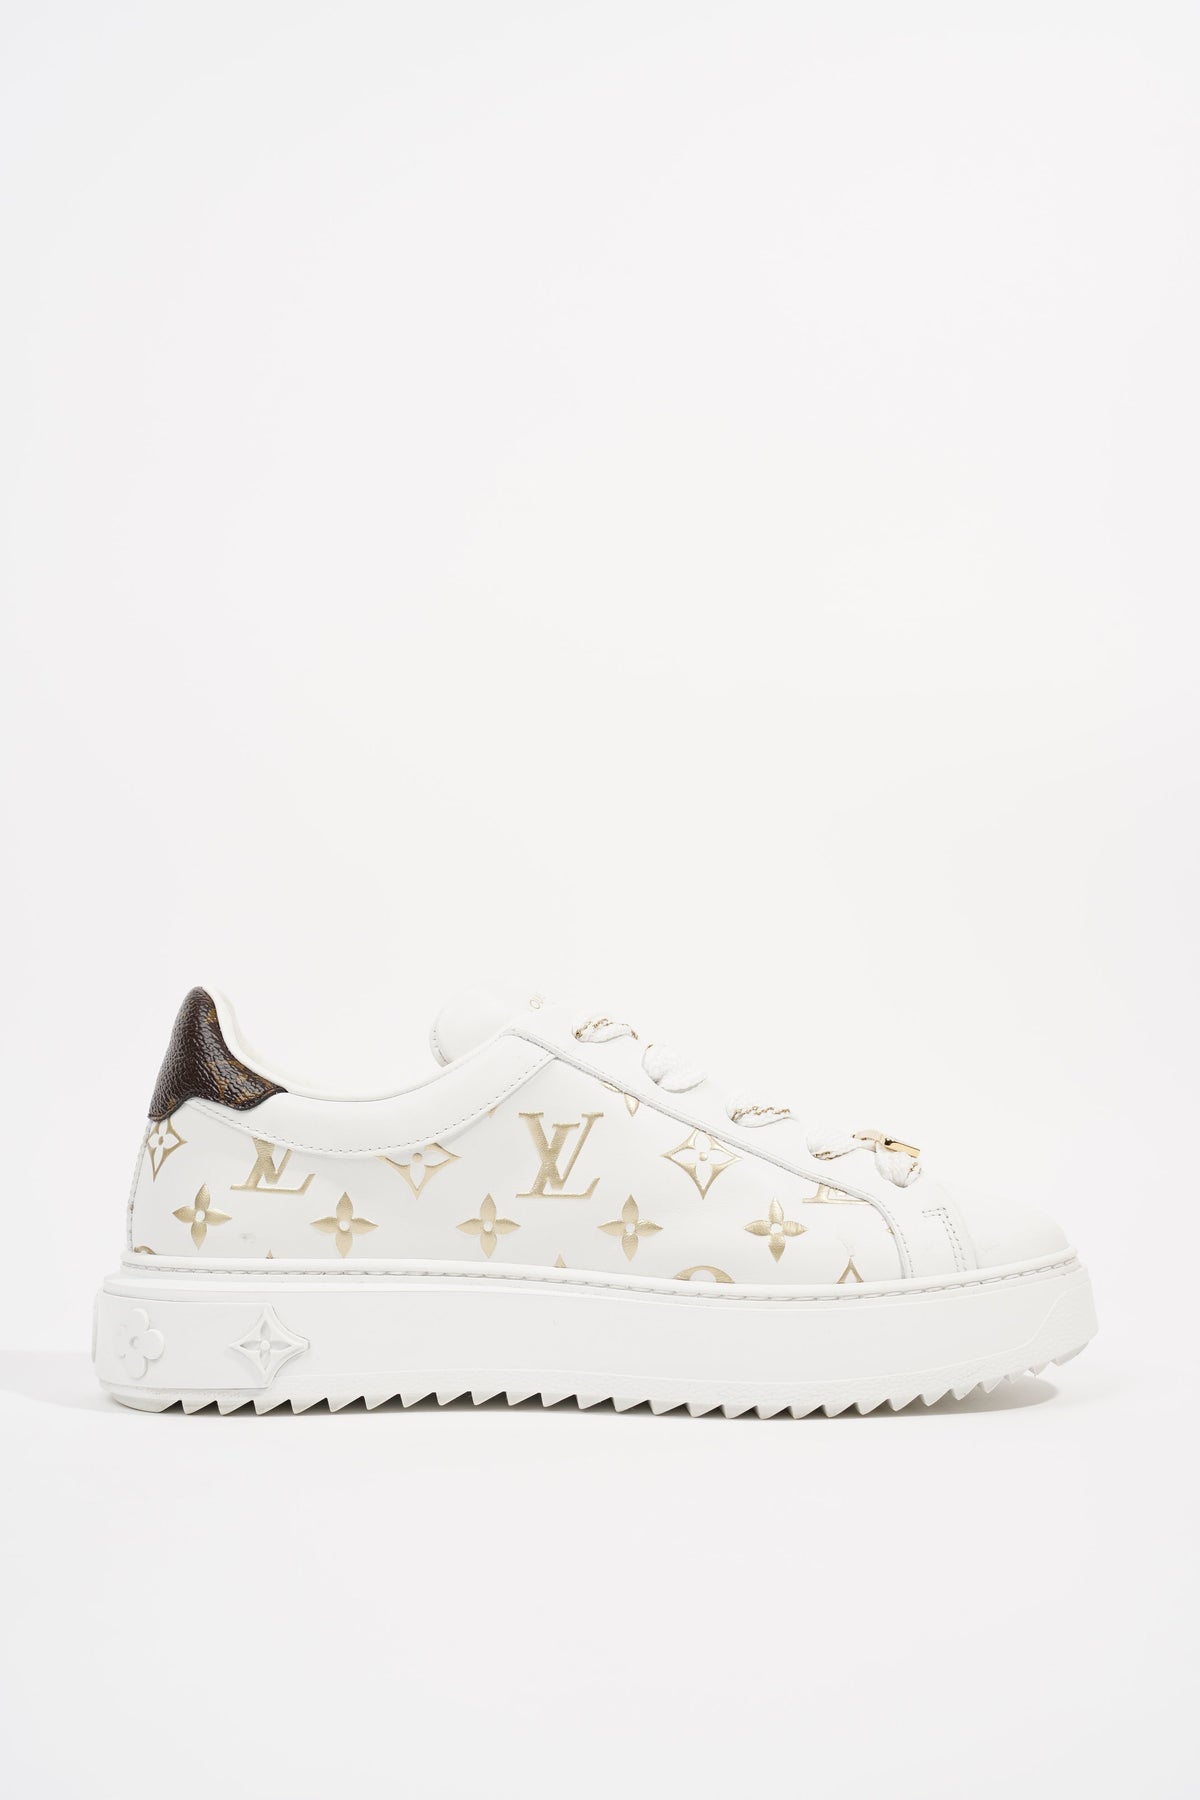 Louis Vuitton® Time Out Sneaker Gold. Size 36.0